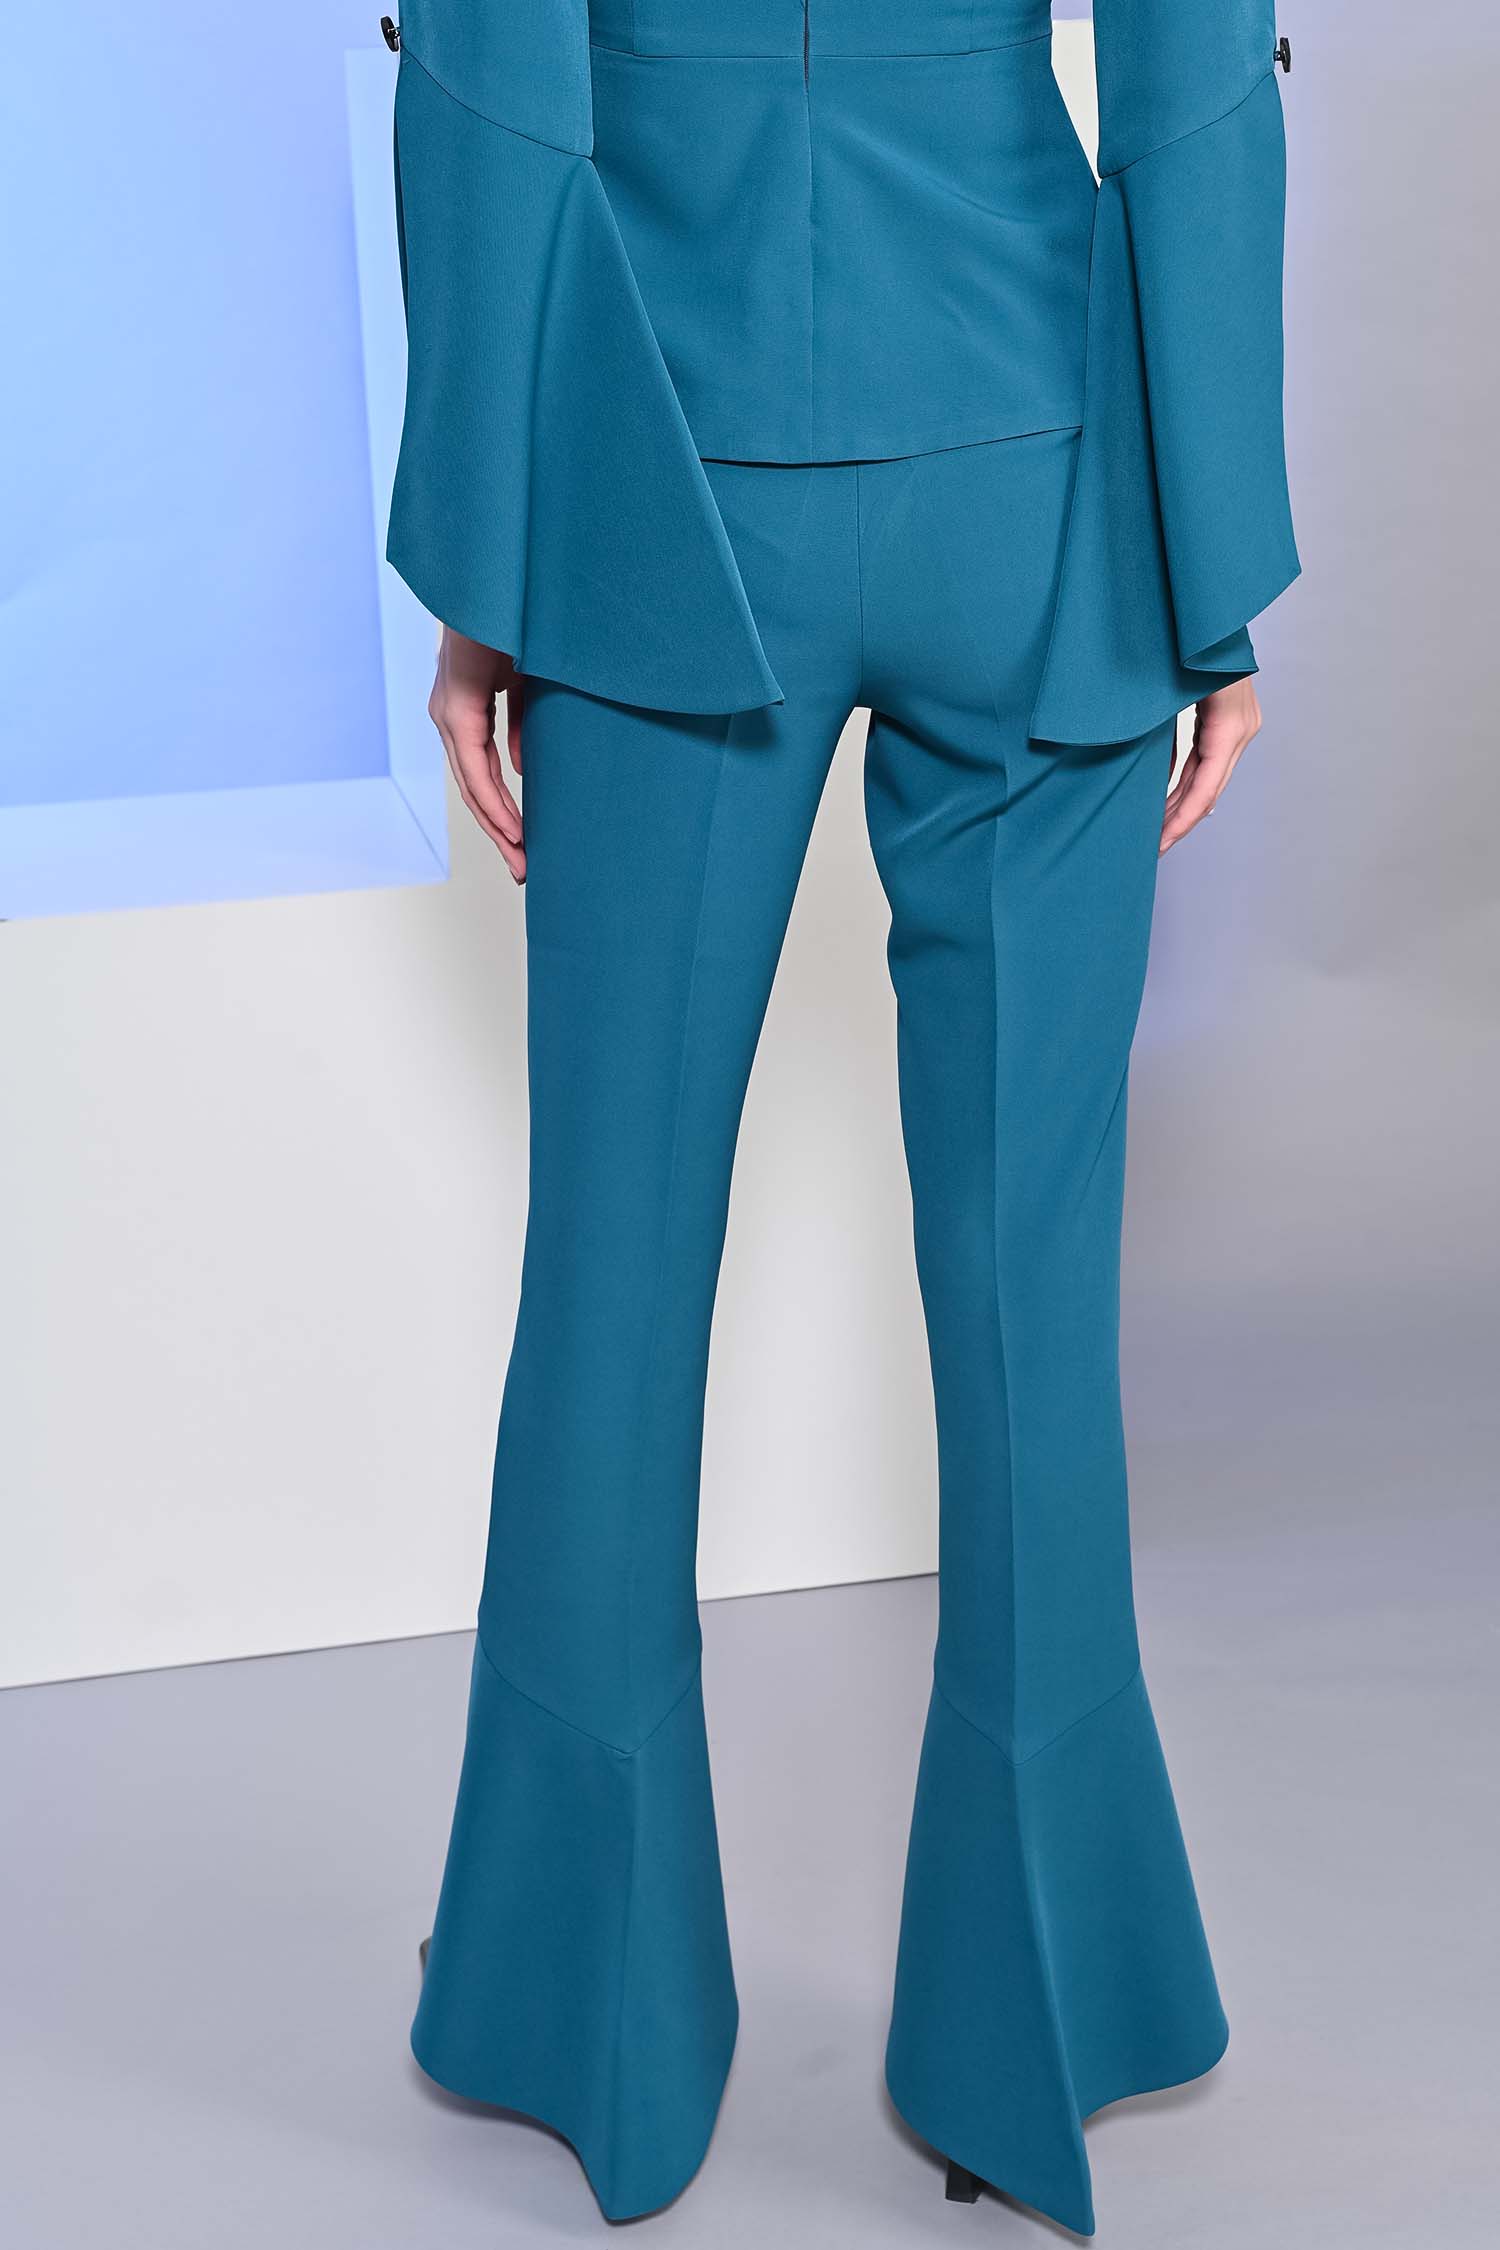 Marc Angelo Elise High Waisted Trousers in Blue | iCLOTHING - iCLOTHING